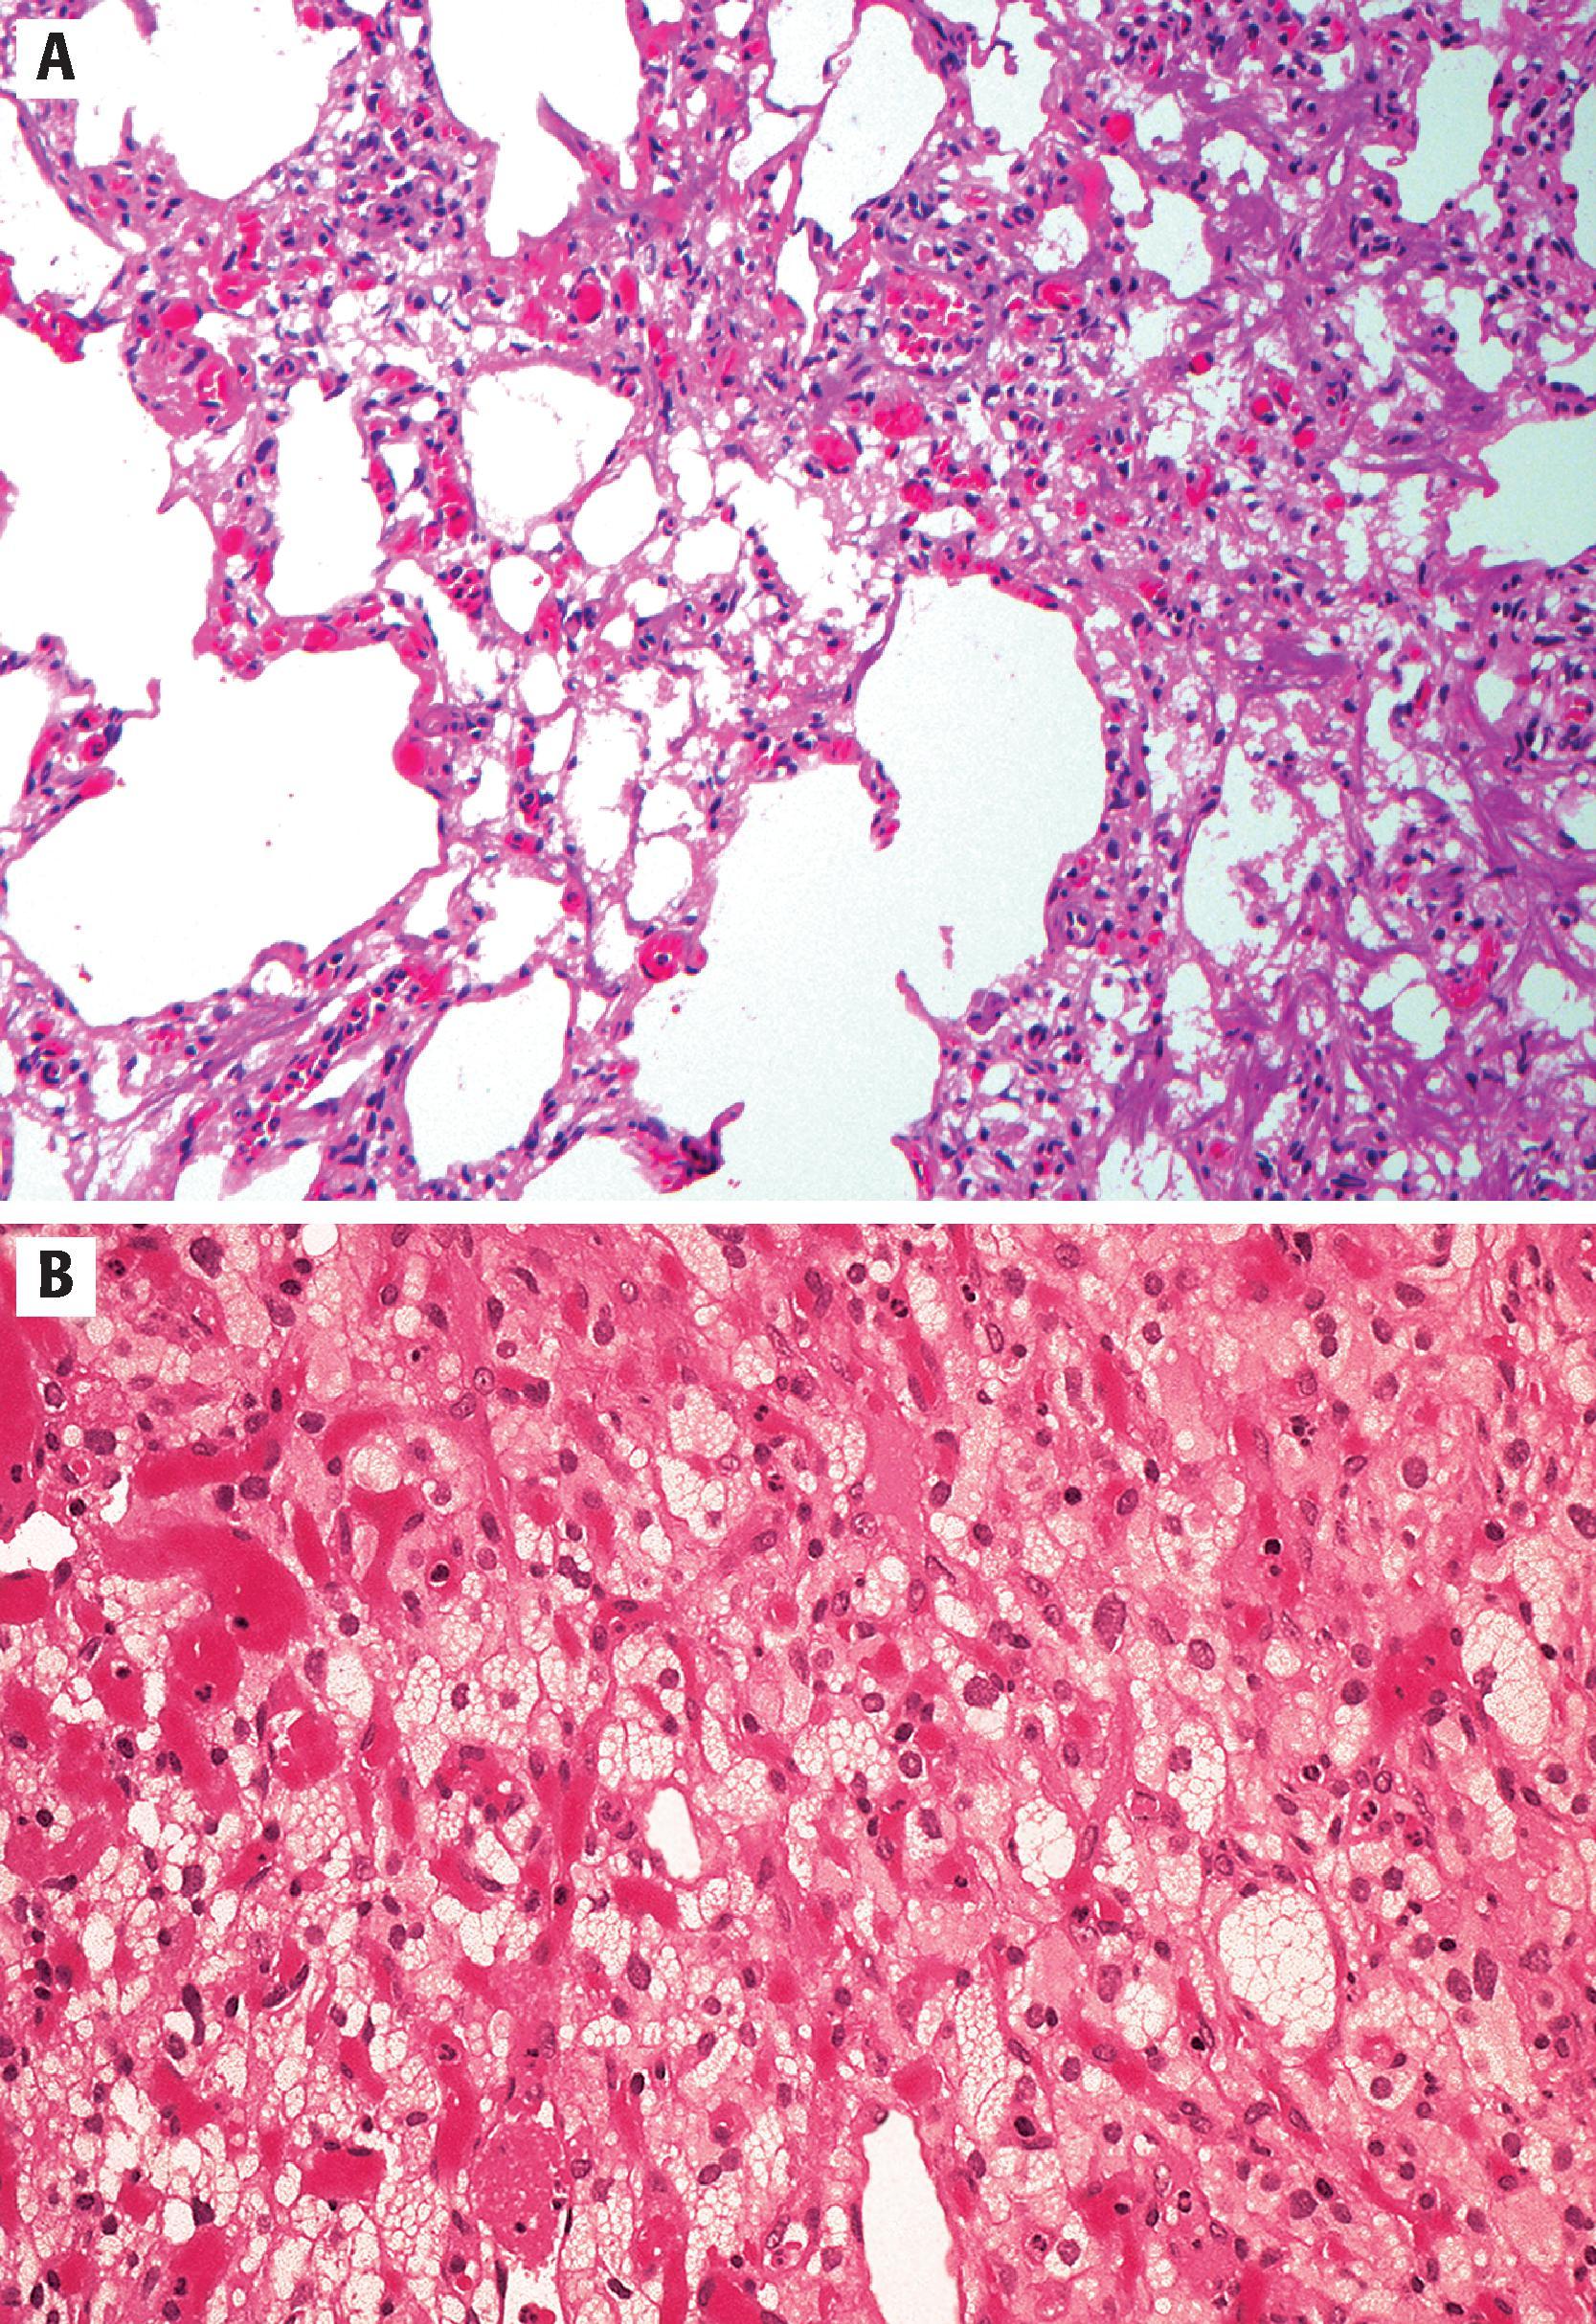 FIGURE 10.8, A, Large cystic pools with abundant vessels mark this hemangioblastoma. B, Hemangioblastoma characterized by the presence of abundant small vessels and stromal cells with clear, vacuolated cytoplasm.